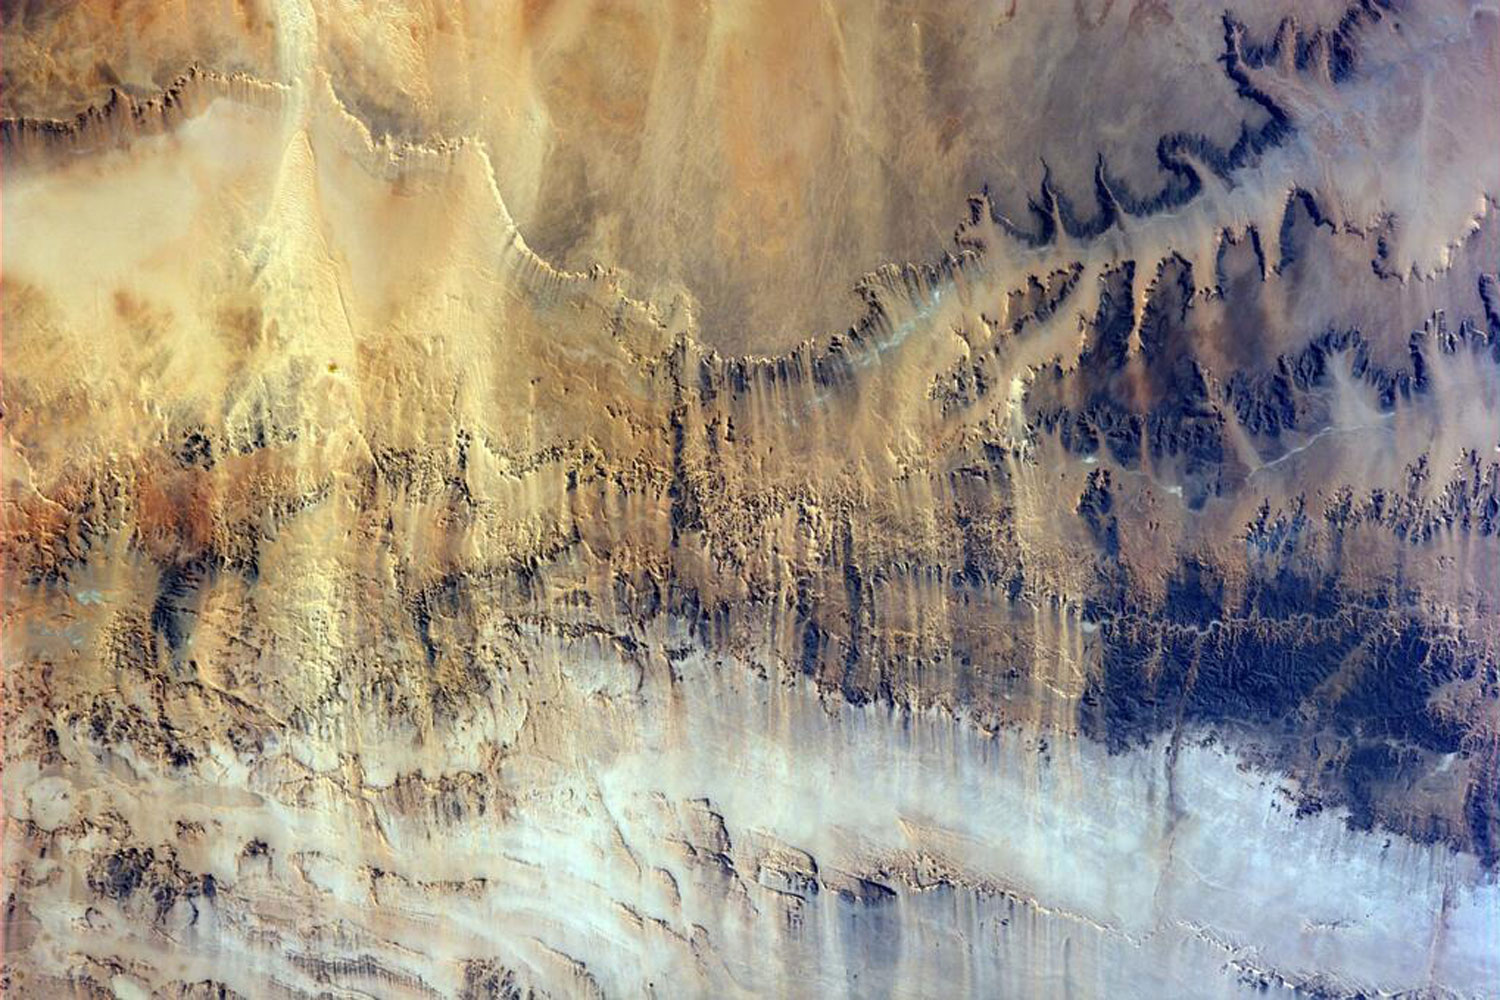 Harsh land. Windswept valleys in northern #Africa